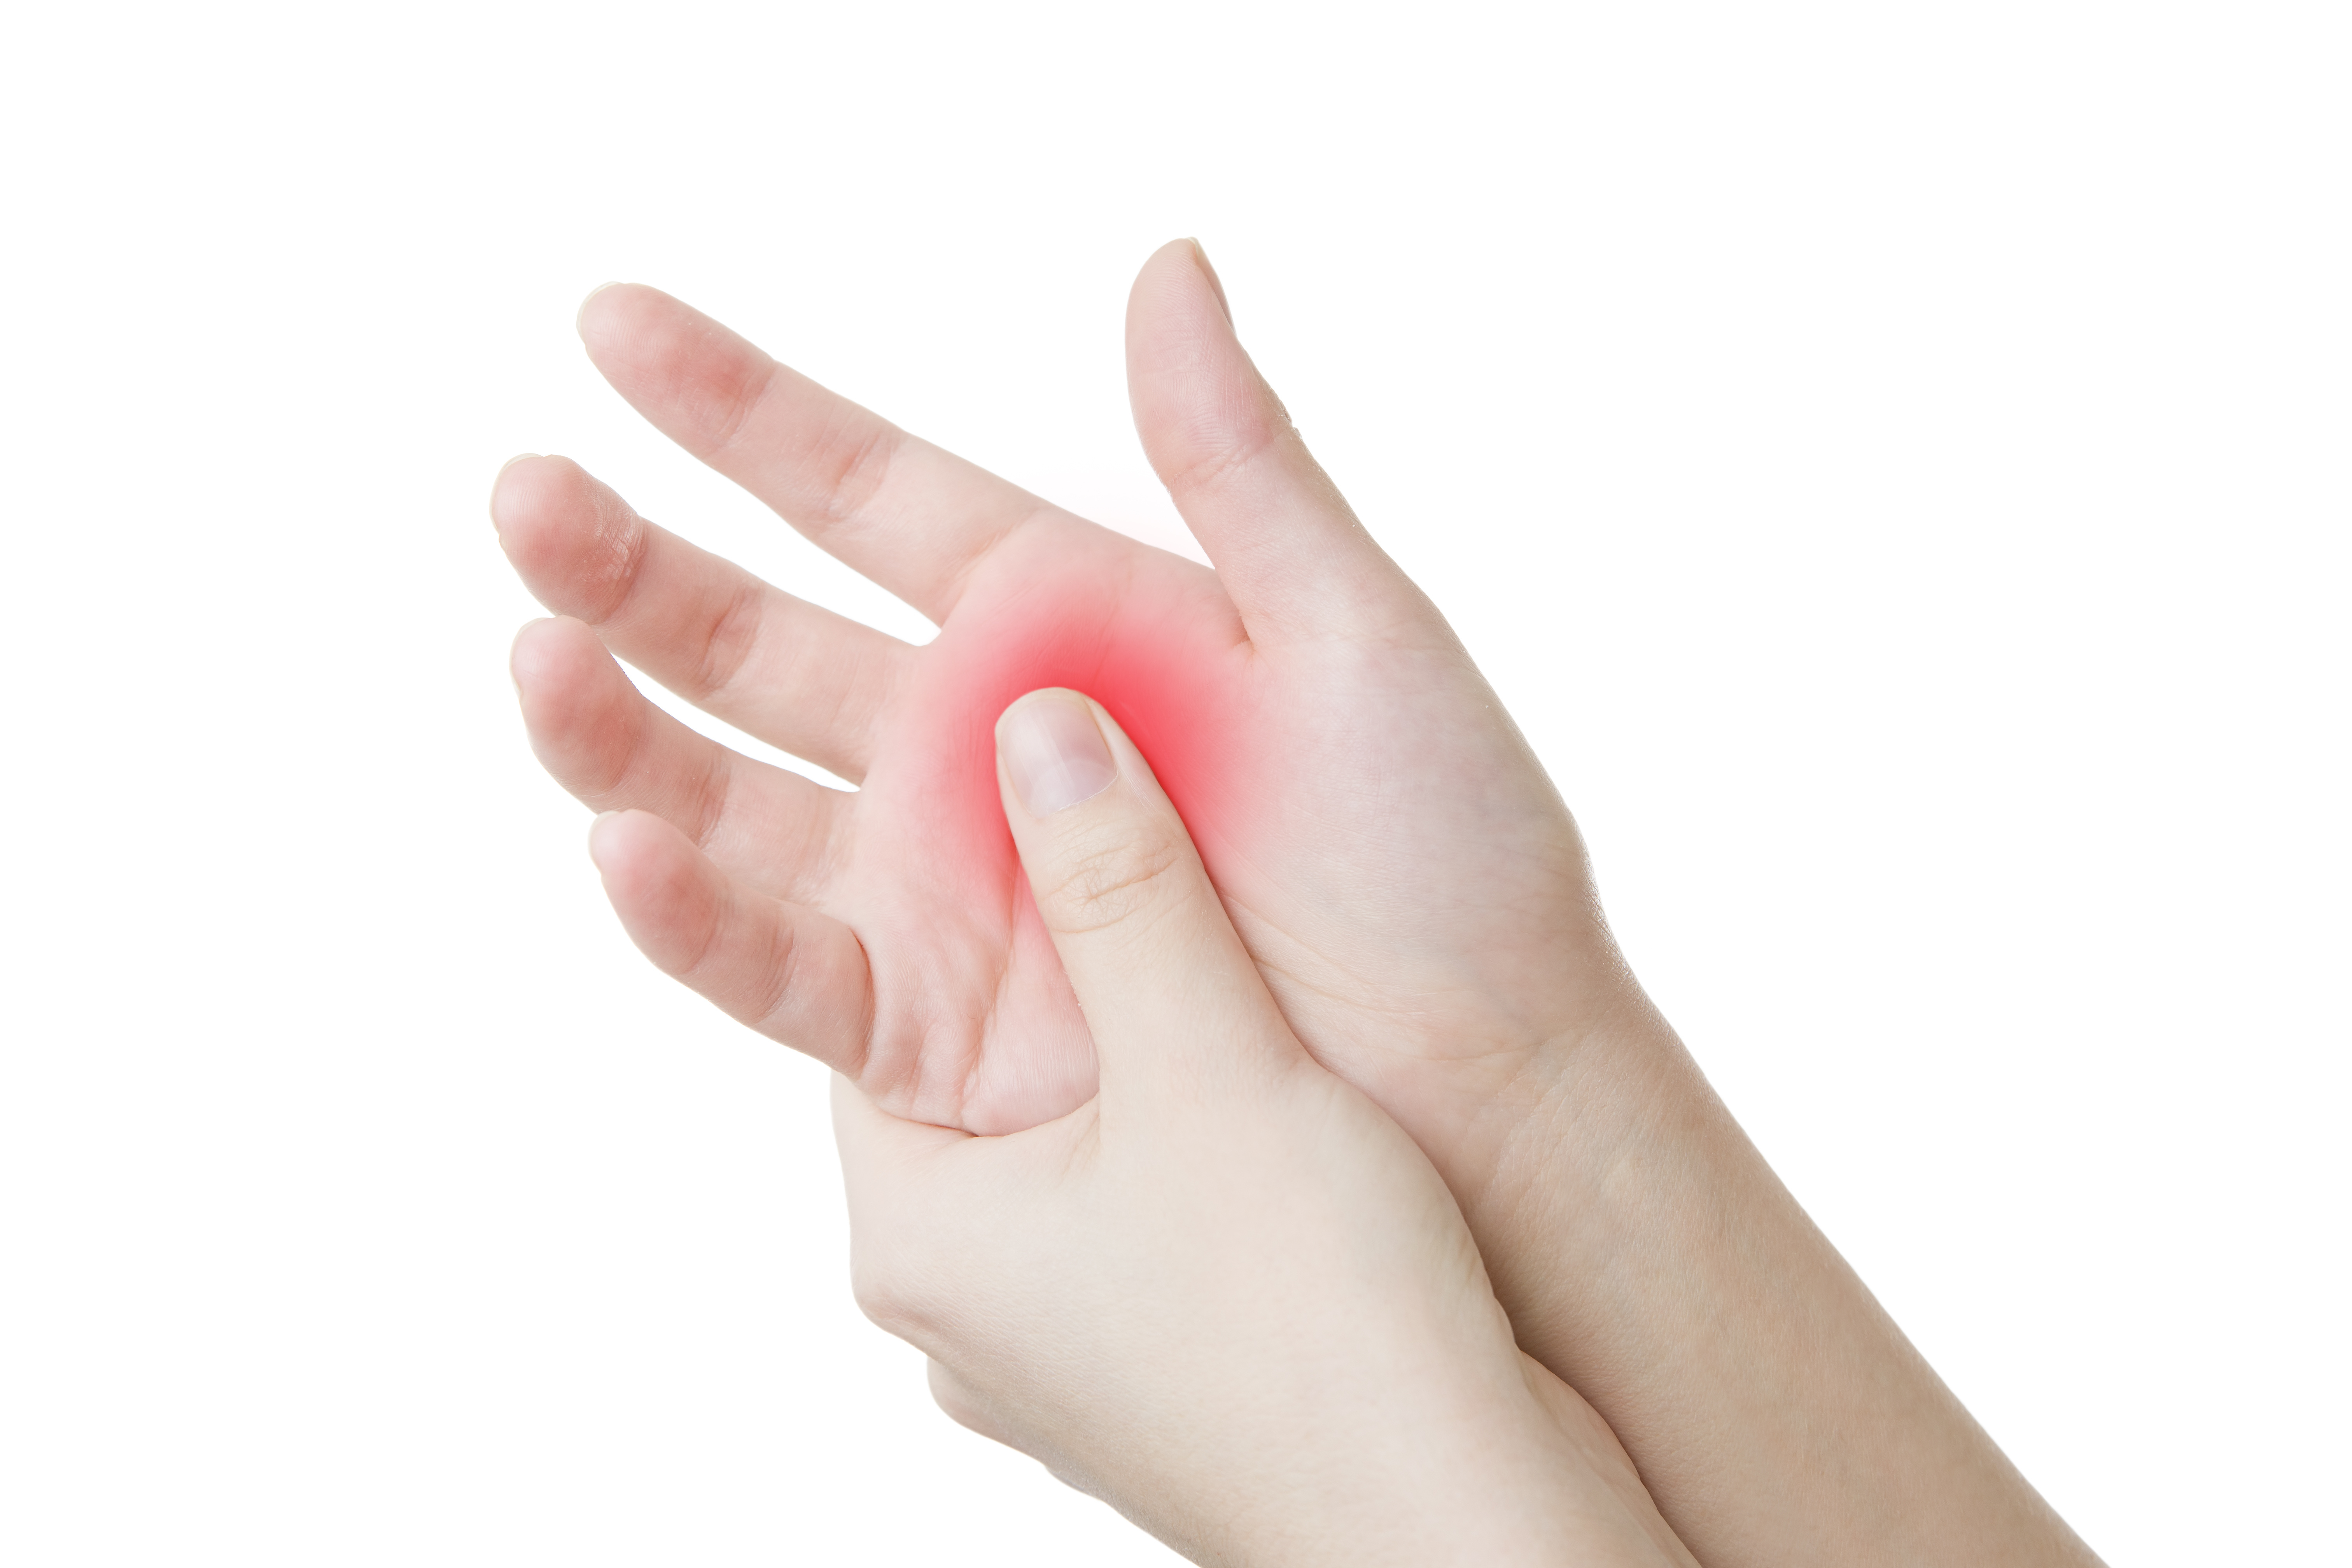  Rheumatoid arthritis finger deformation, usually eat these kinds of food, and say goodbye to it